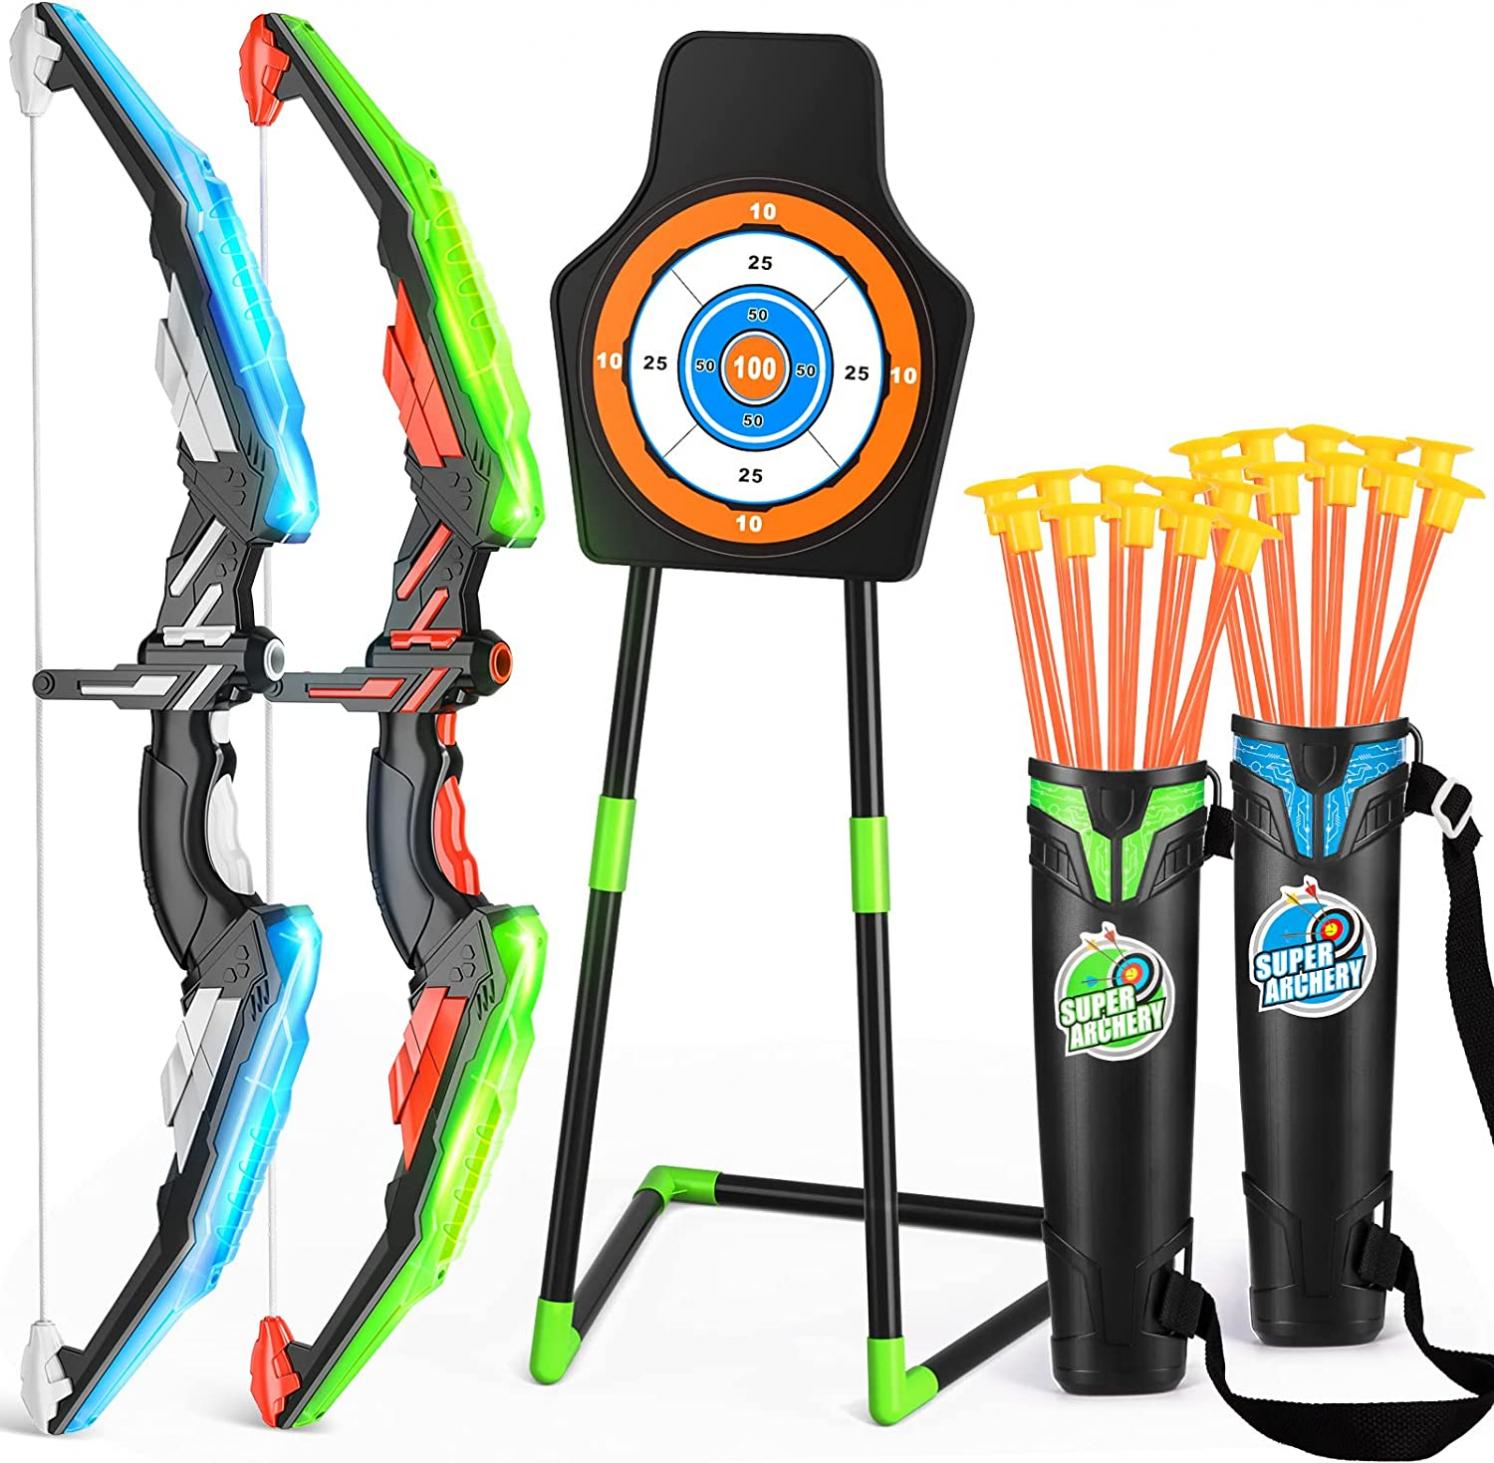 TEMI 2 Pack Bow and Arrow for Kids -Light Up Archery Toy Set -Includes 2 Bows, 20 Suction Cup Arrows & 2 Quivers & Standing Target, Outdoor Toys for Kids Boys Girls